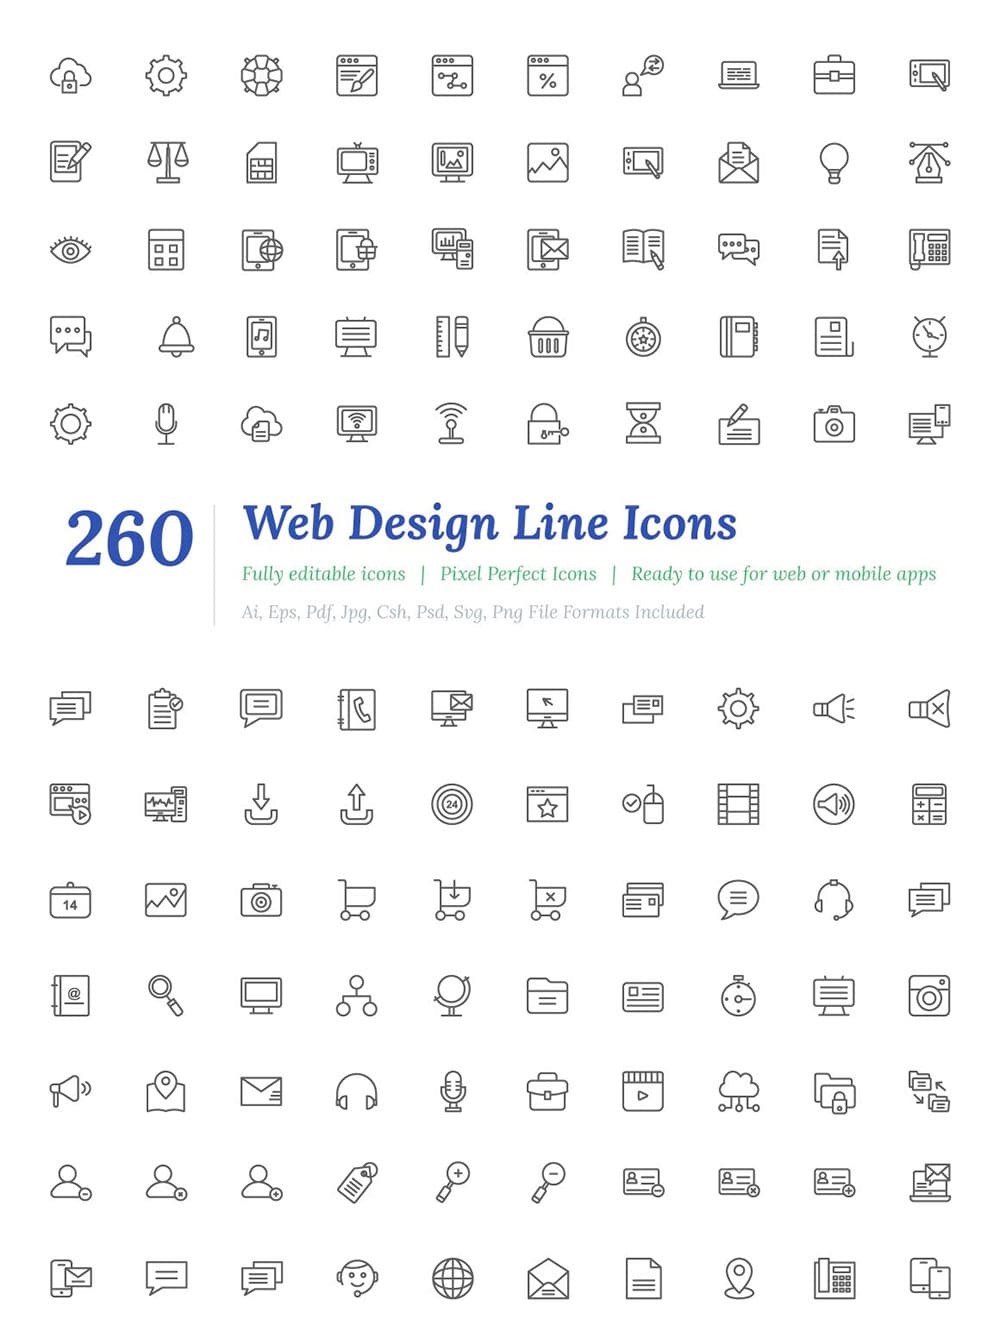 260 web design line icons, picture for pinterest.